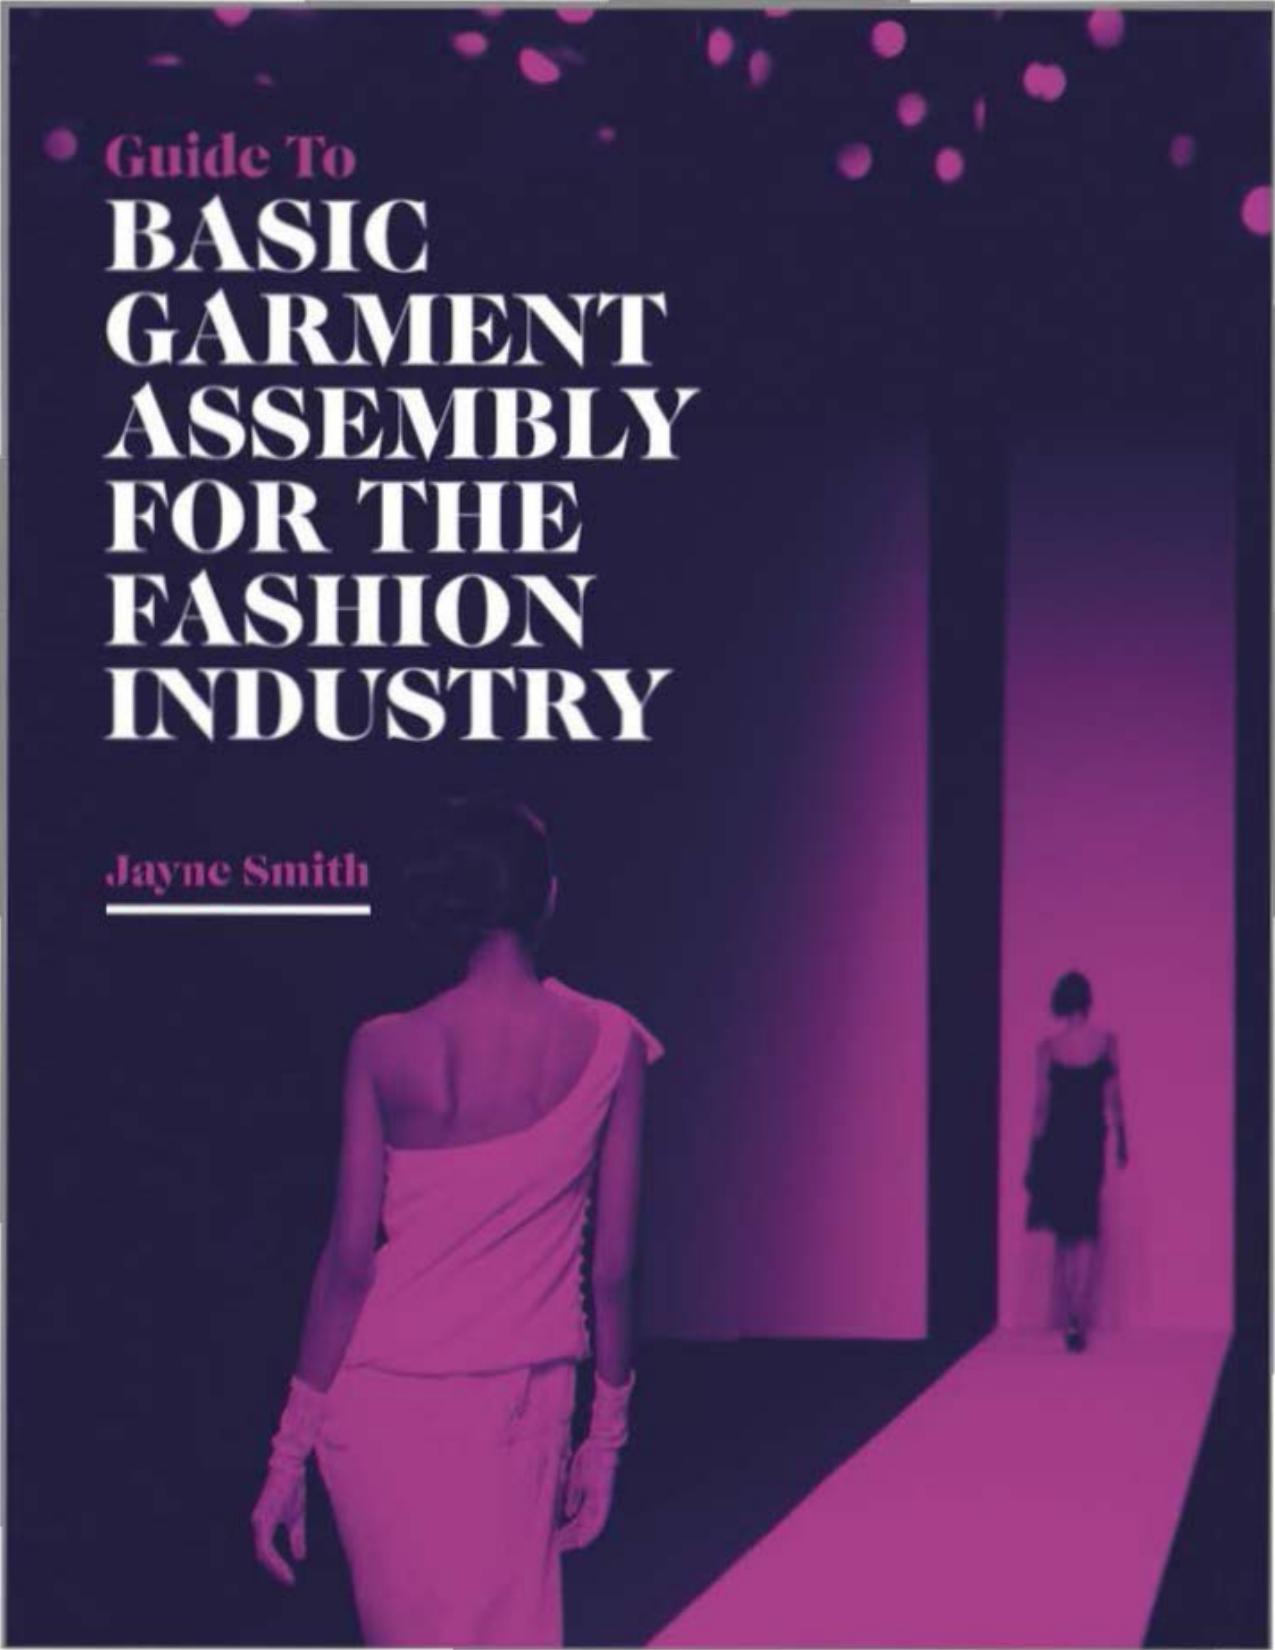 Guide to Basic Garment Assembly for the Fashion Industry by Jayne Smith